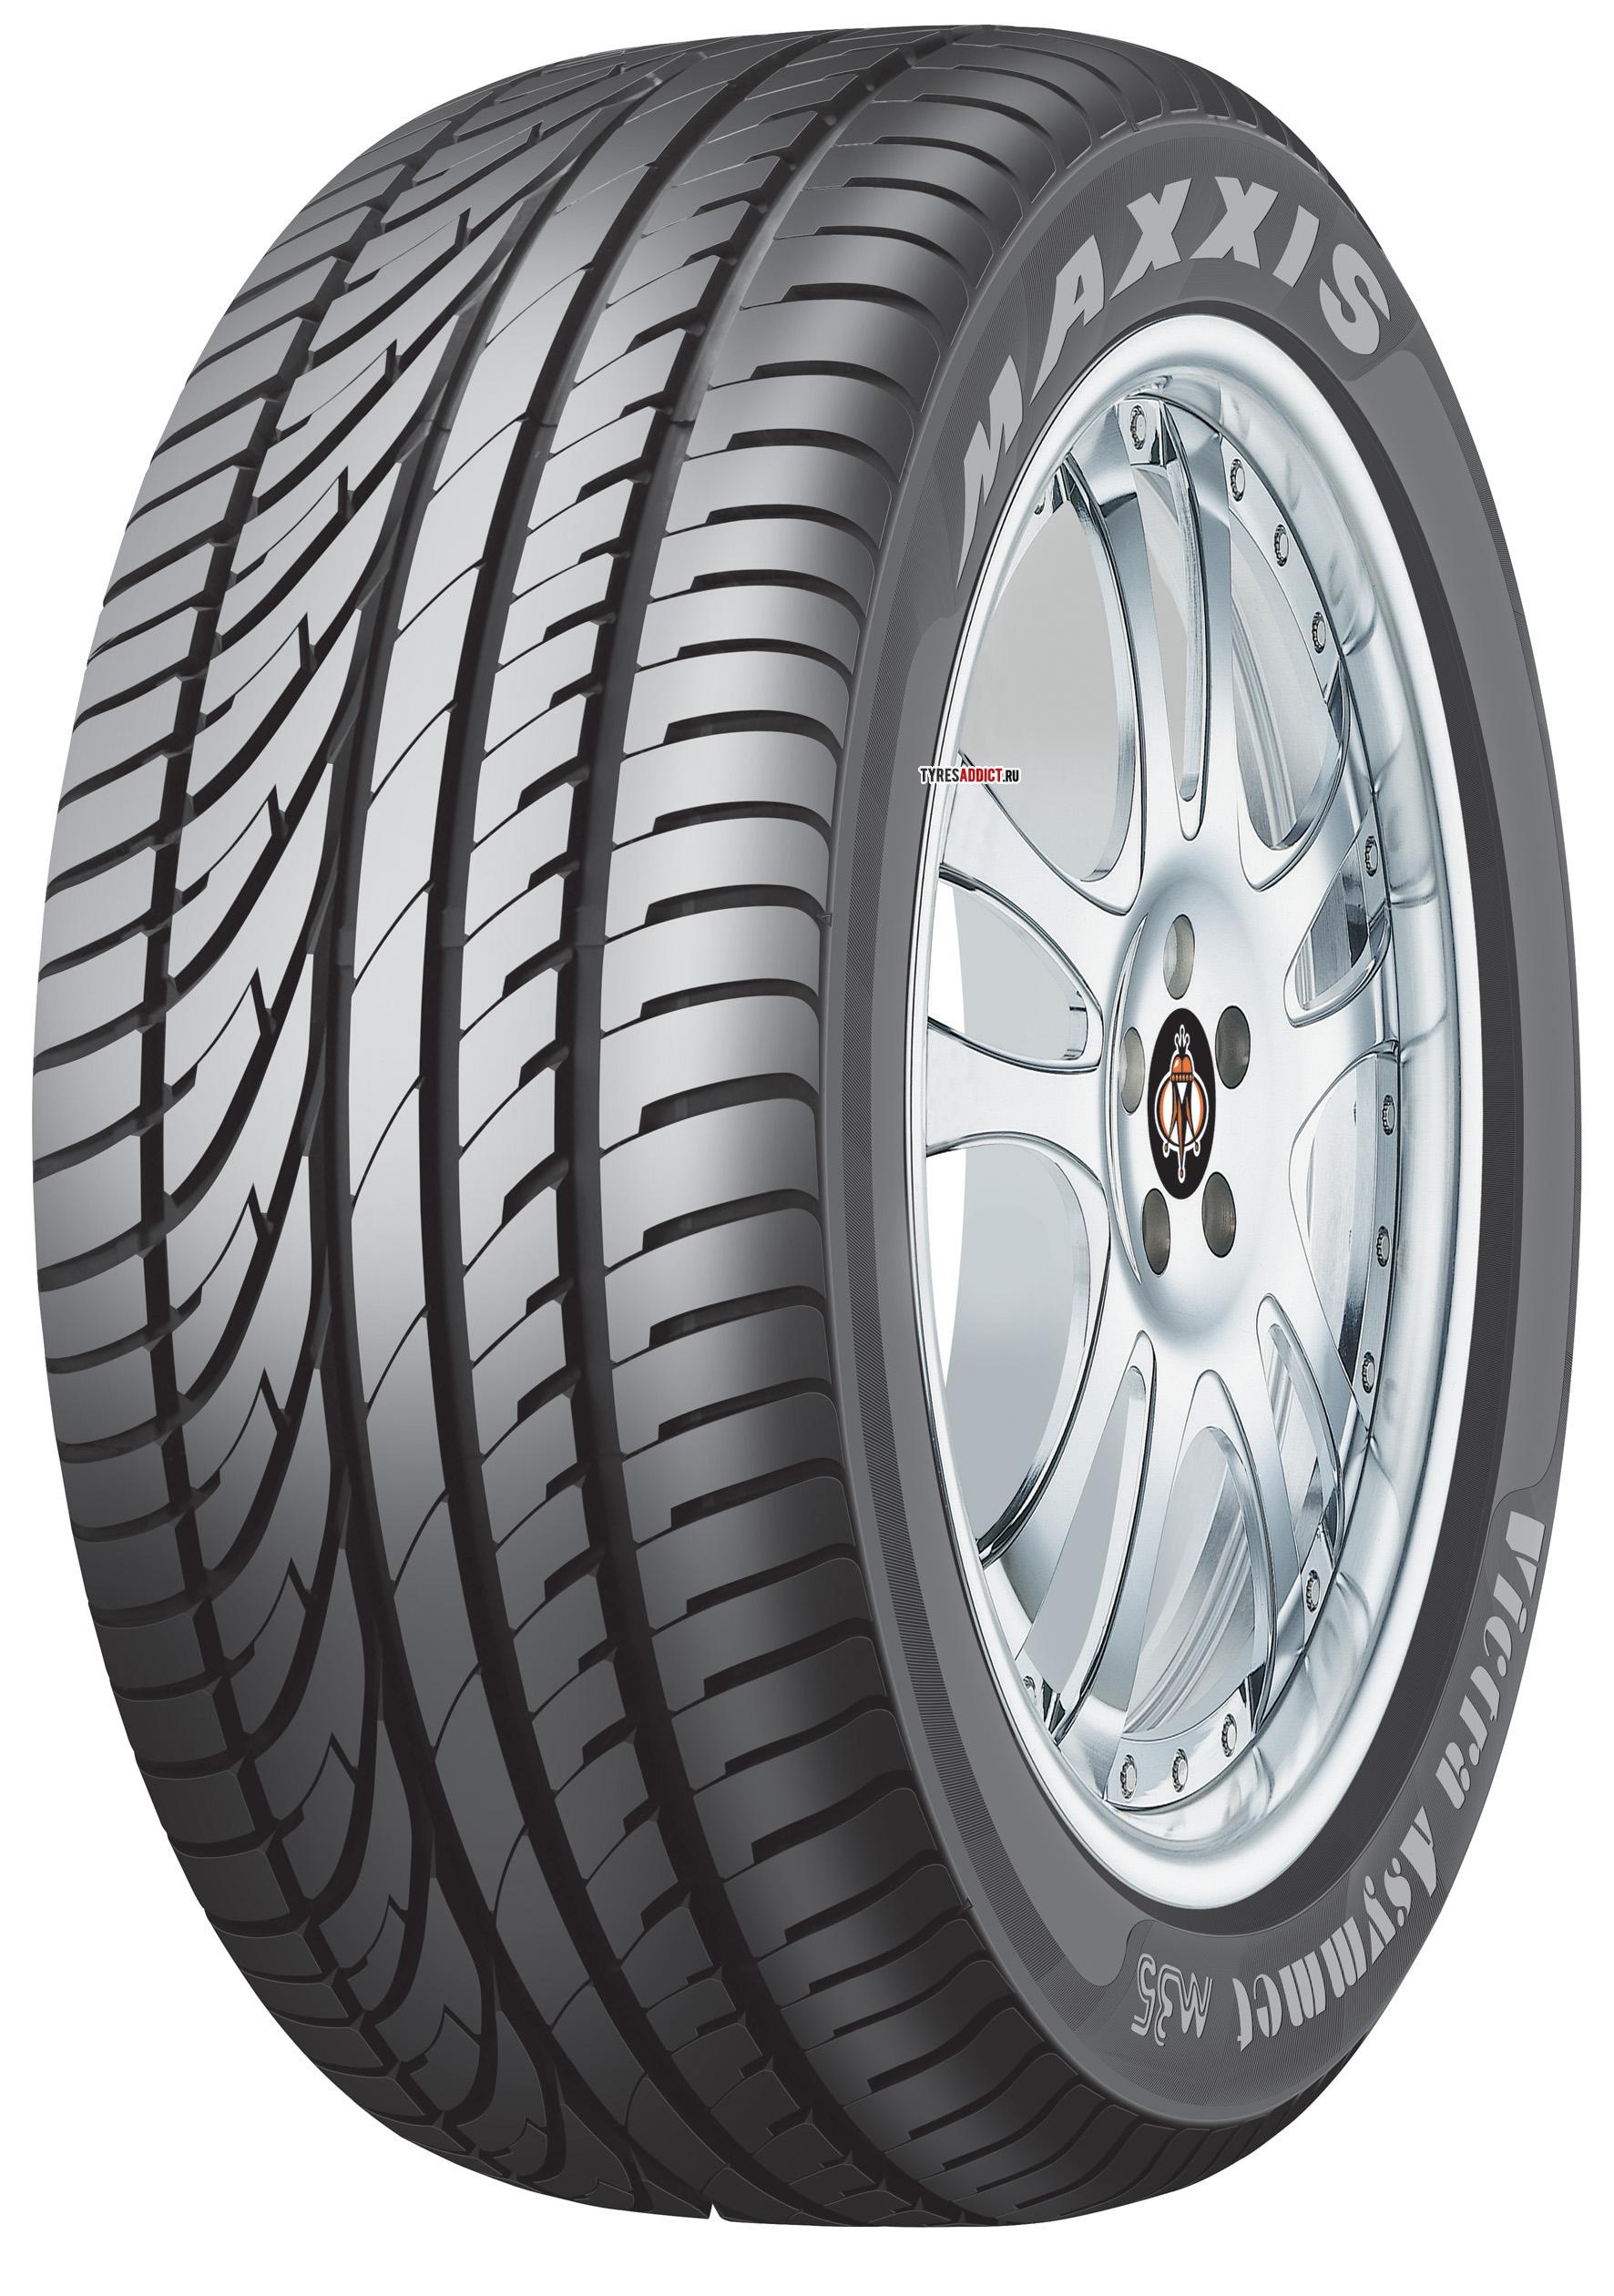 Шины maxxis victra sport отзывы. Maxxis m36+. Maxxis m36 Victra. Автомобильная шина Maxxis m35 Victra Asymmet 195/60 r15 88v летняя. Резина Maxxis r16 Victra.